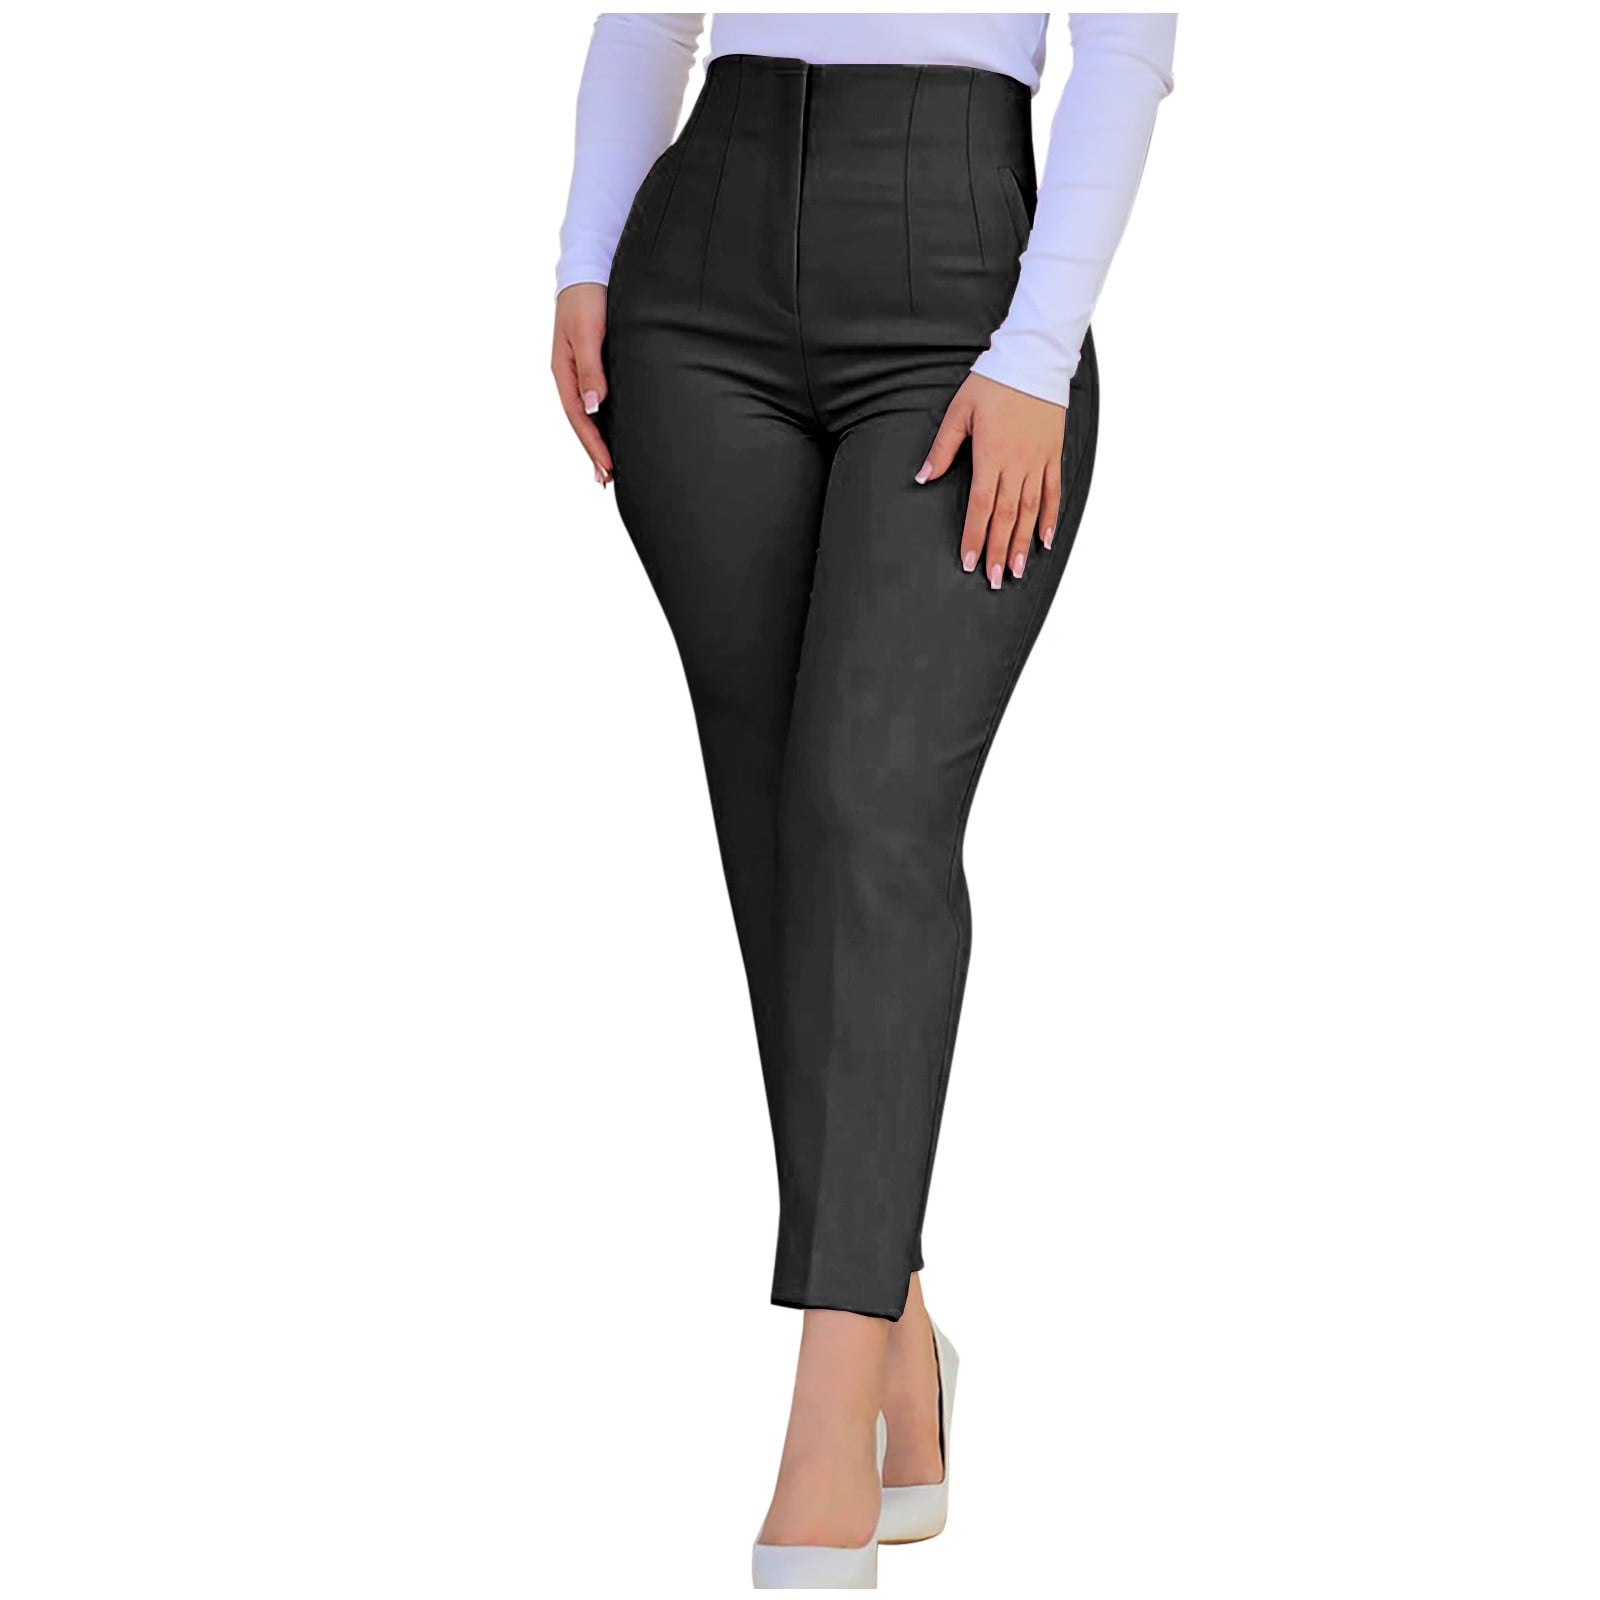 LIBRCLO Stretch Skinny Dress Pants for Women Business Work Casual Office  Pull-on Dressy Leggings Trousers 